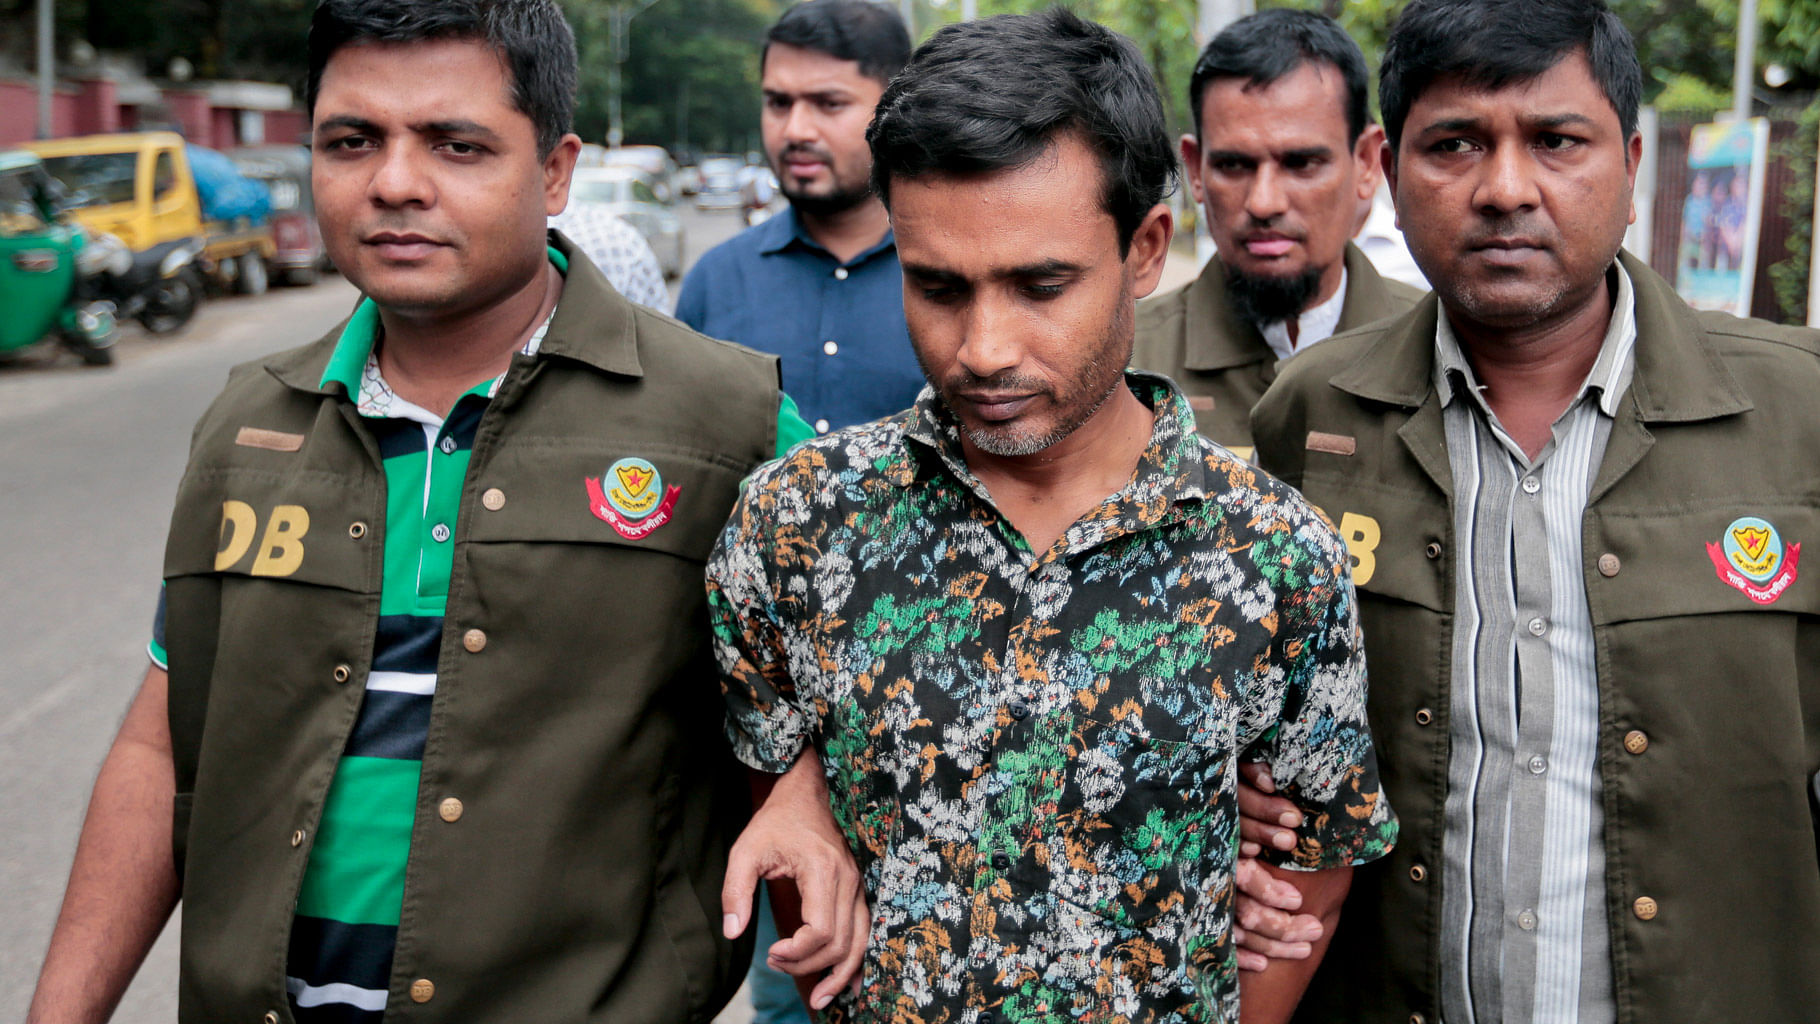 Members of Bangladesh Police Detective Branch (DB) escort a man whom they have identified as Shariful Islam Shihab, a former member of the banned Islamic group Harkatul Jihad as they walk him in front of the media in Dhaka, Bangladesh, Sunday, 15 May  2016. (Photo: AP)